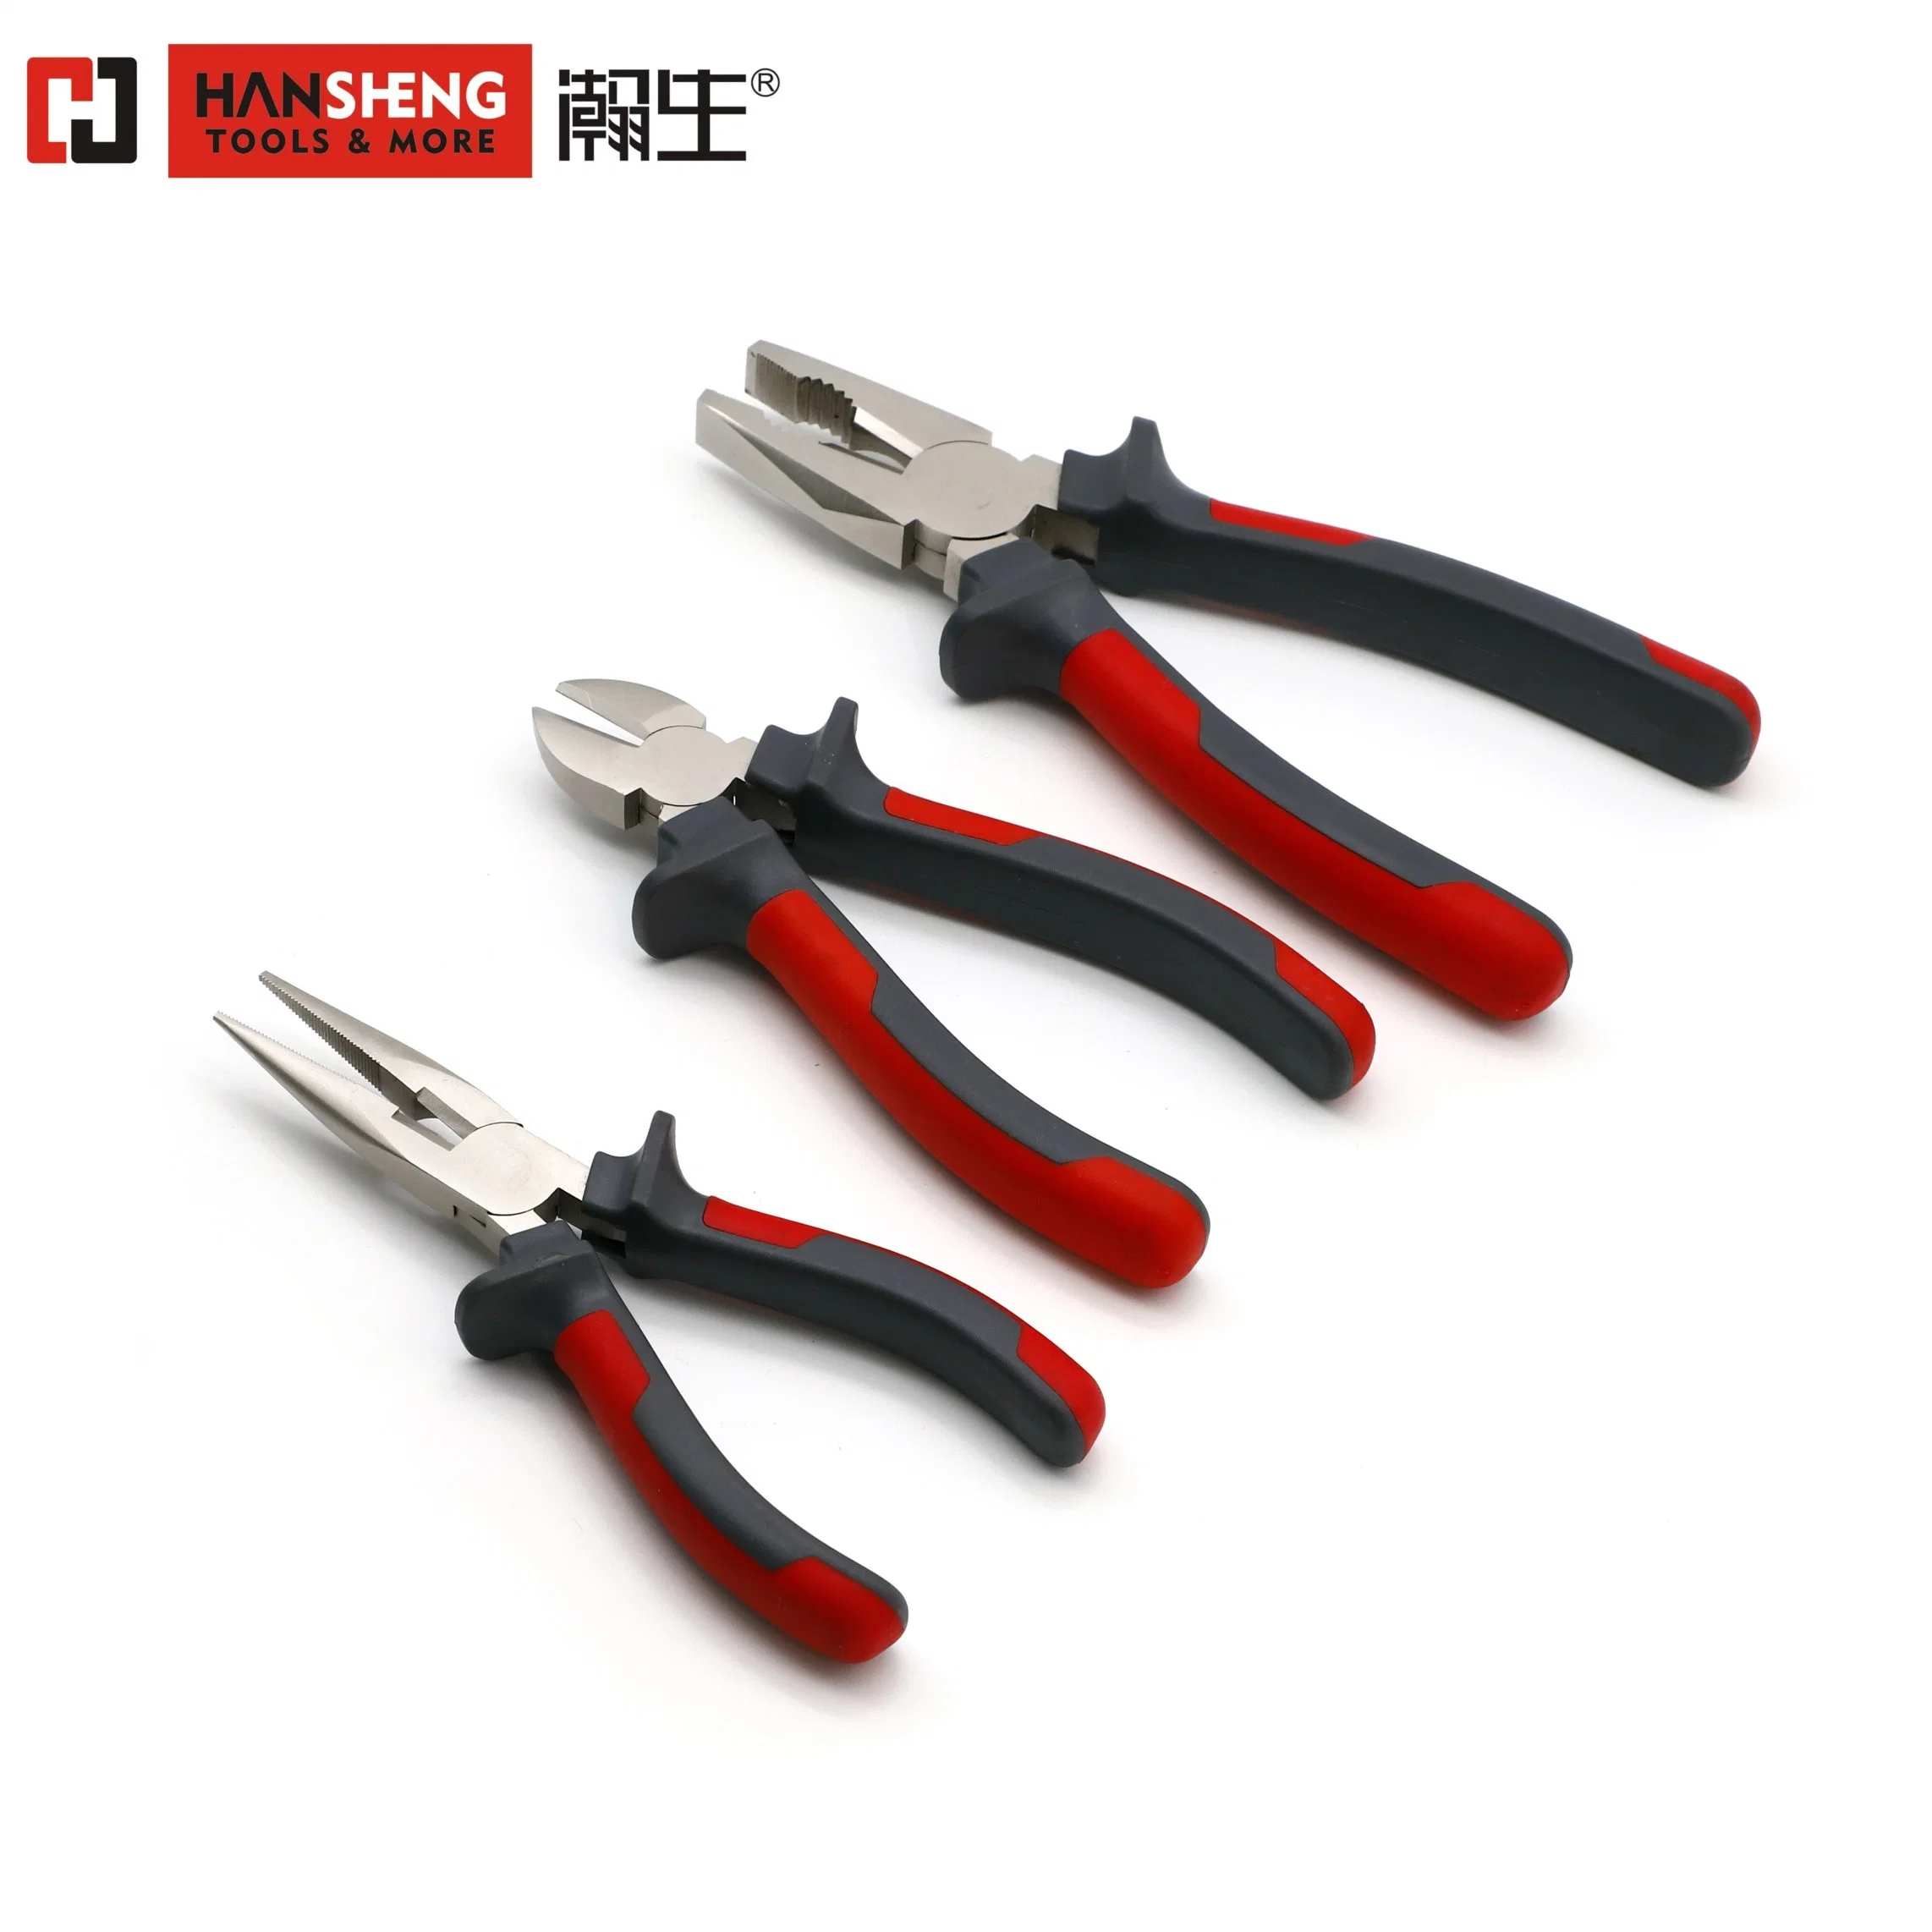 6", 7", 8", Professional Combination Pliers, Hand Tool, Hardware Tools, Made of Cr-V, PVC Handle, German Type, High quality/High cost performance 